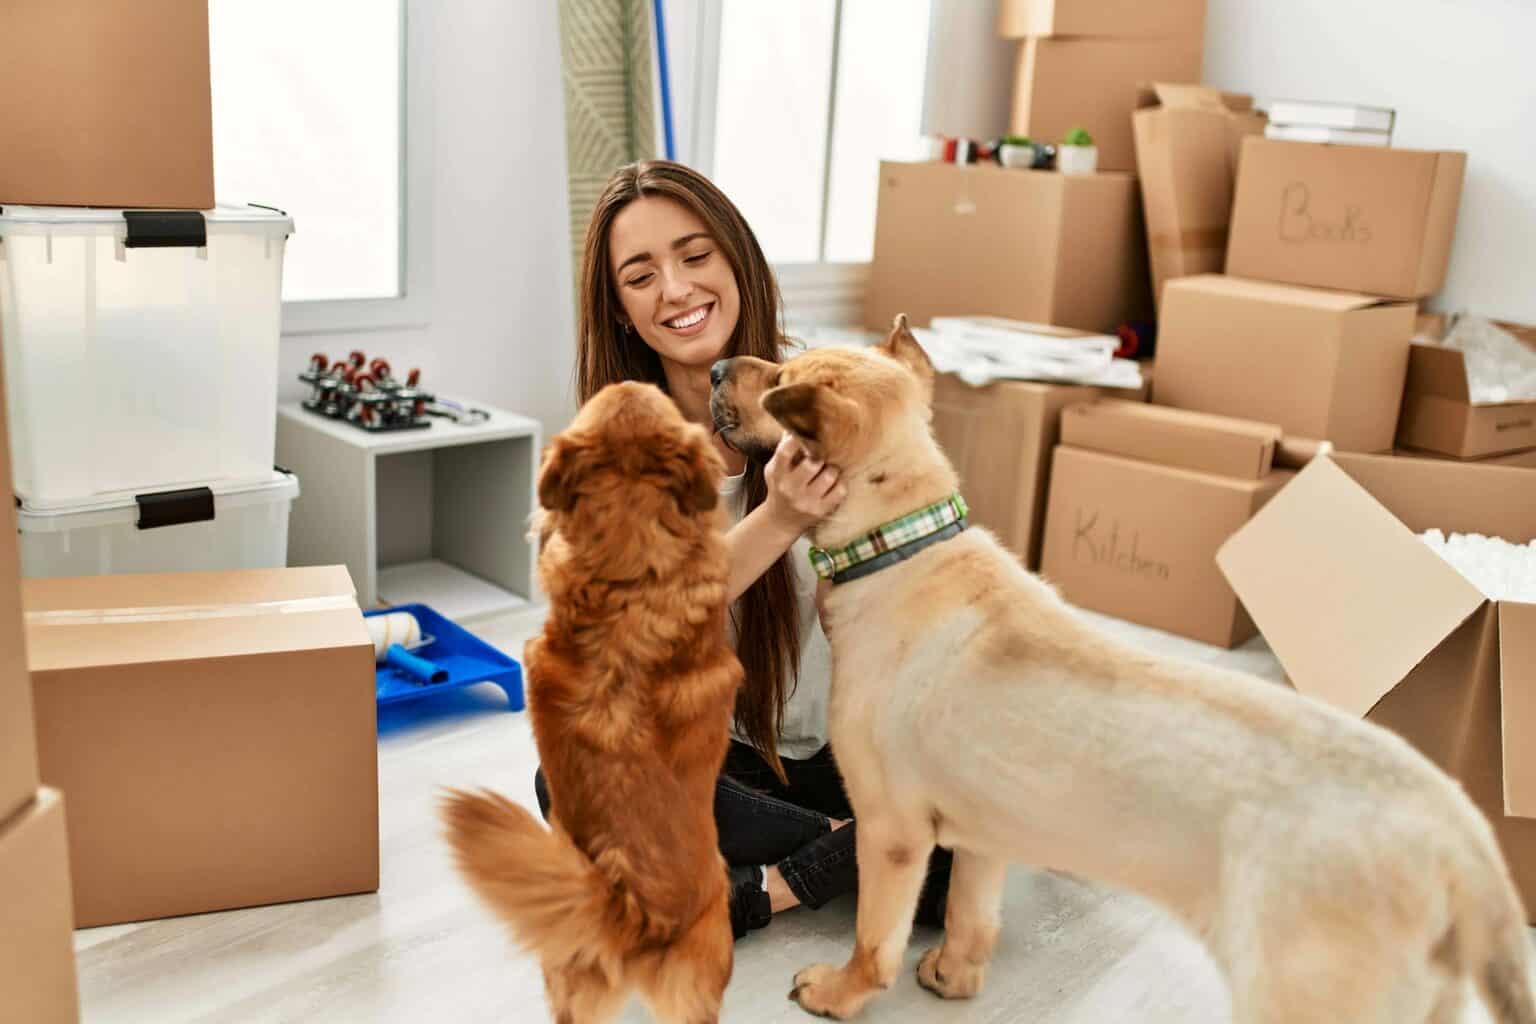 Woman plays with dogs while surrounded by moving boxes. Be patient after moving with dogs. Give dogs extra time and attention to help them adjust to your new living situation.